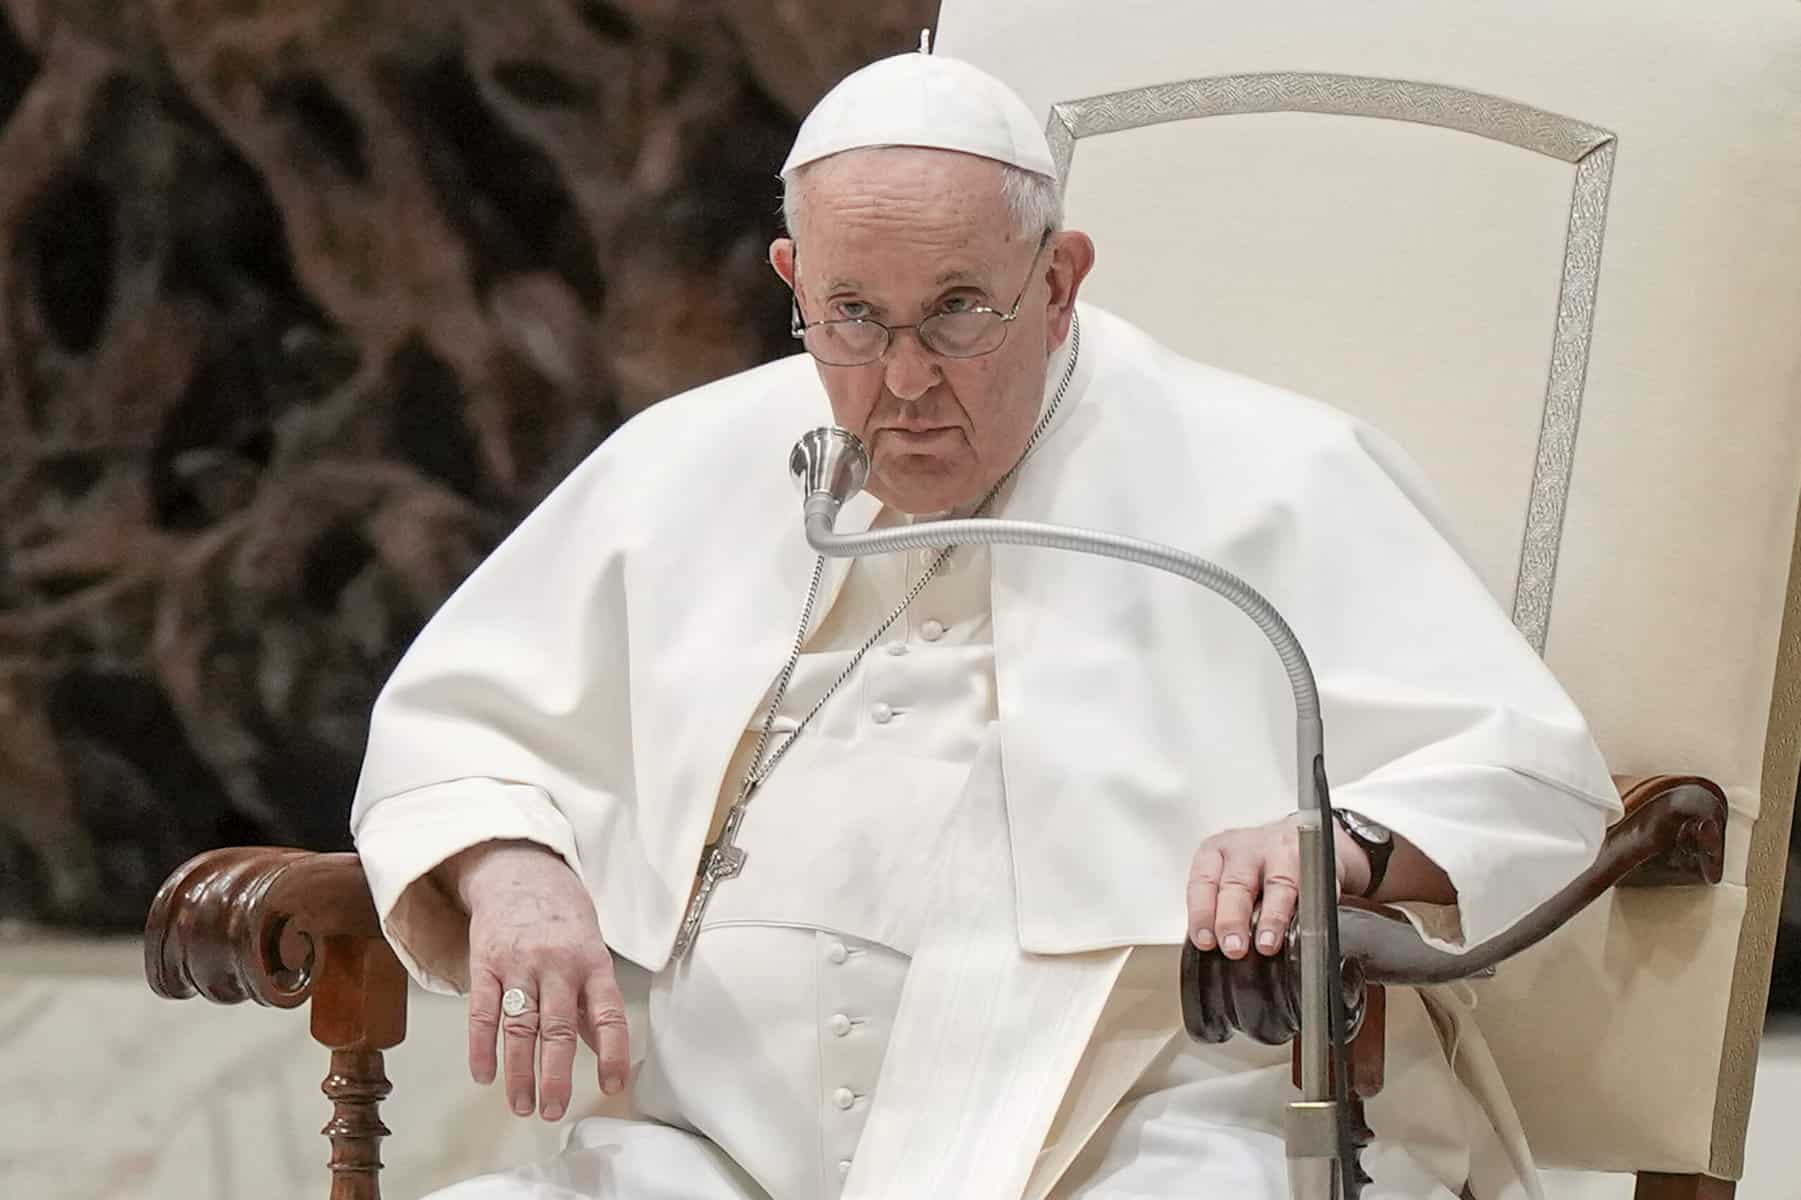 The Pope sits in a papal chair dressed in white.